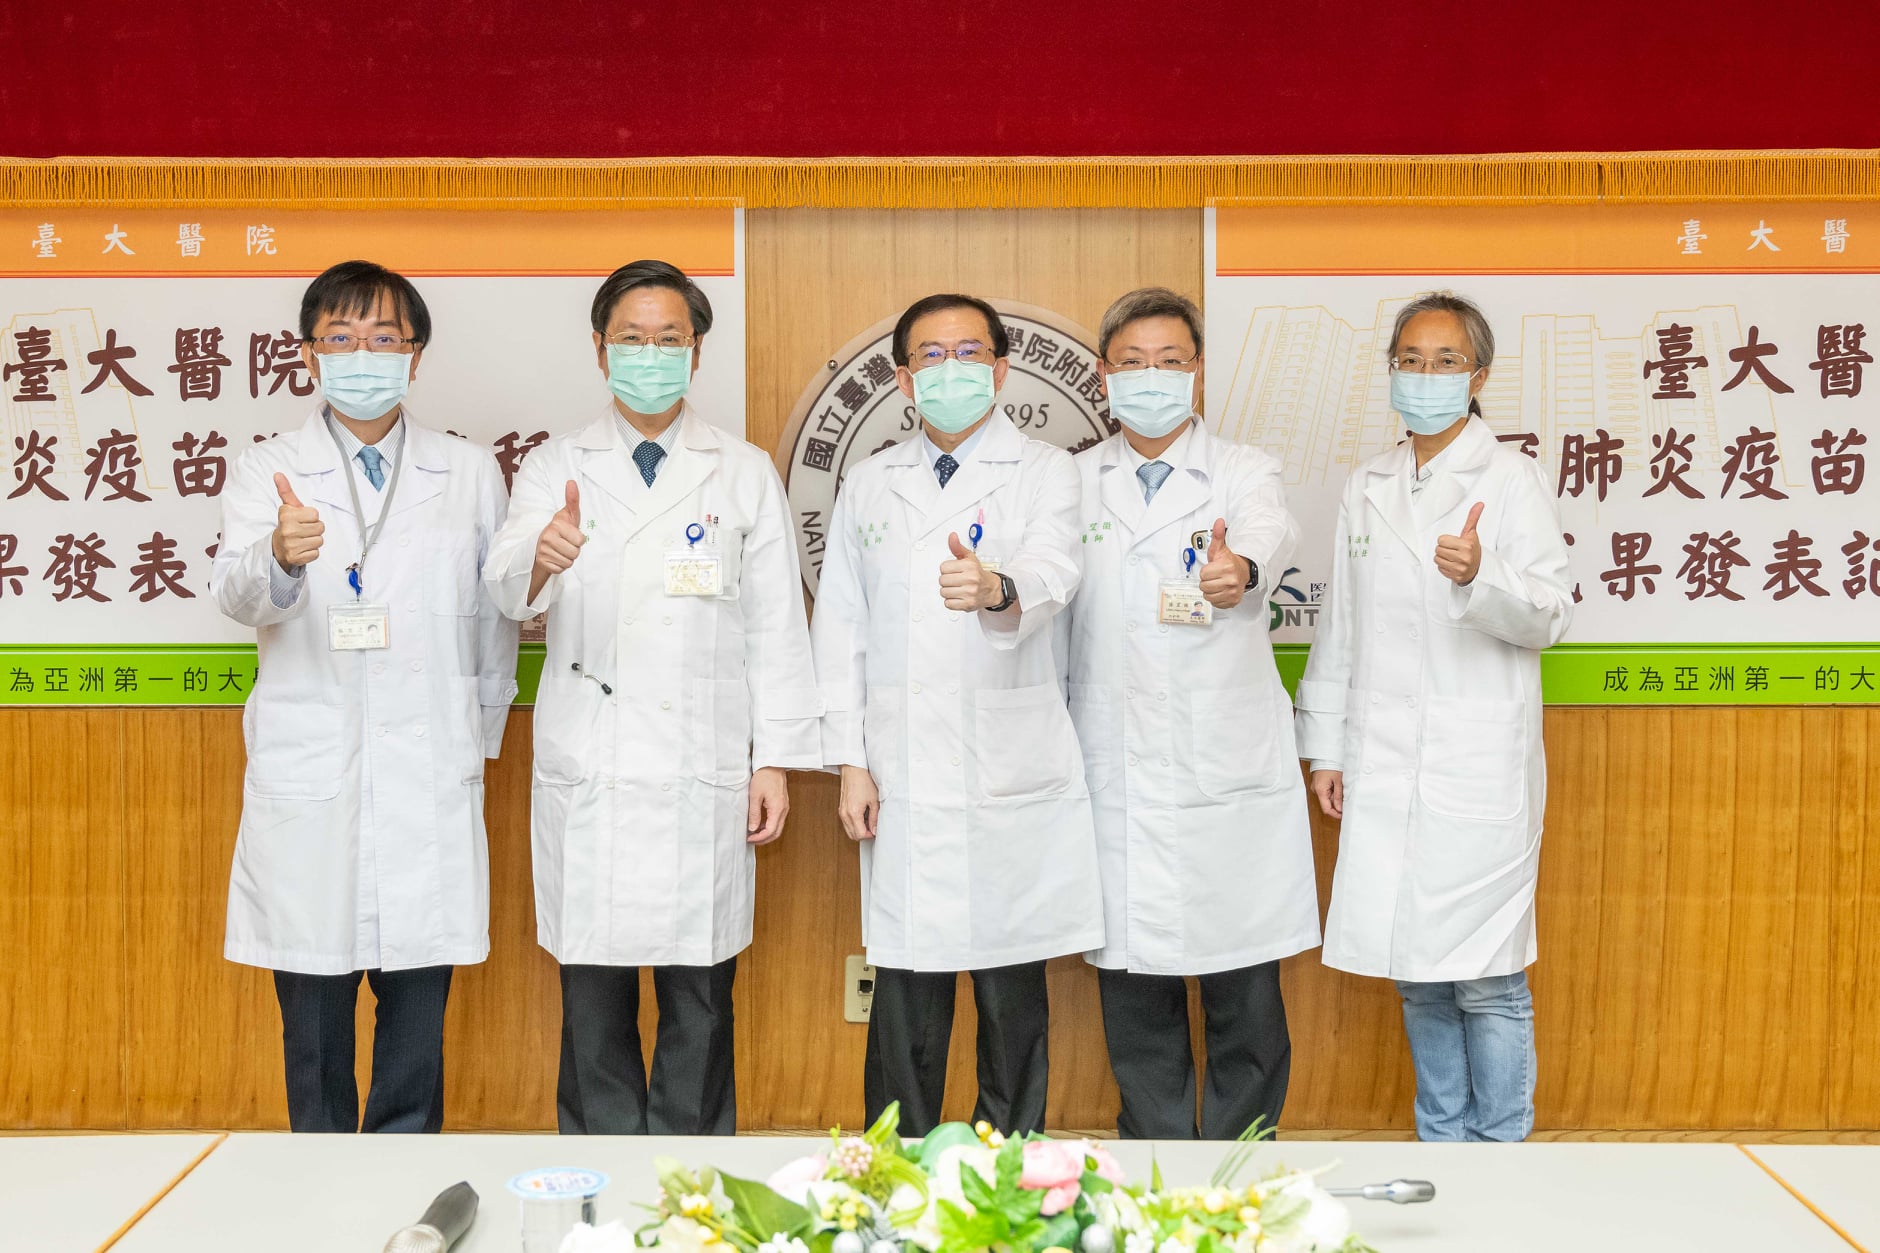 Doctors took a group photo together. (Photo / Retrieved from the National Taiwan University Hospital)